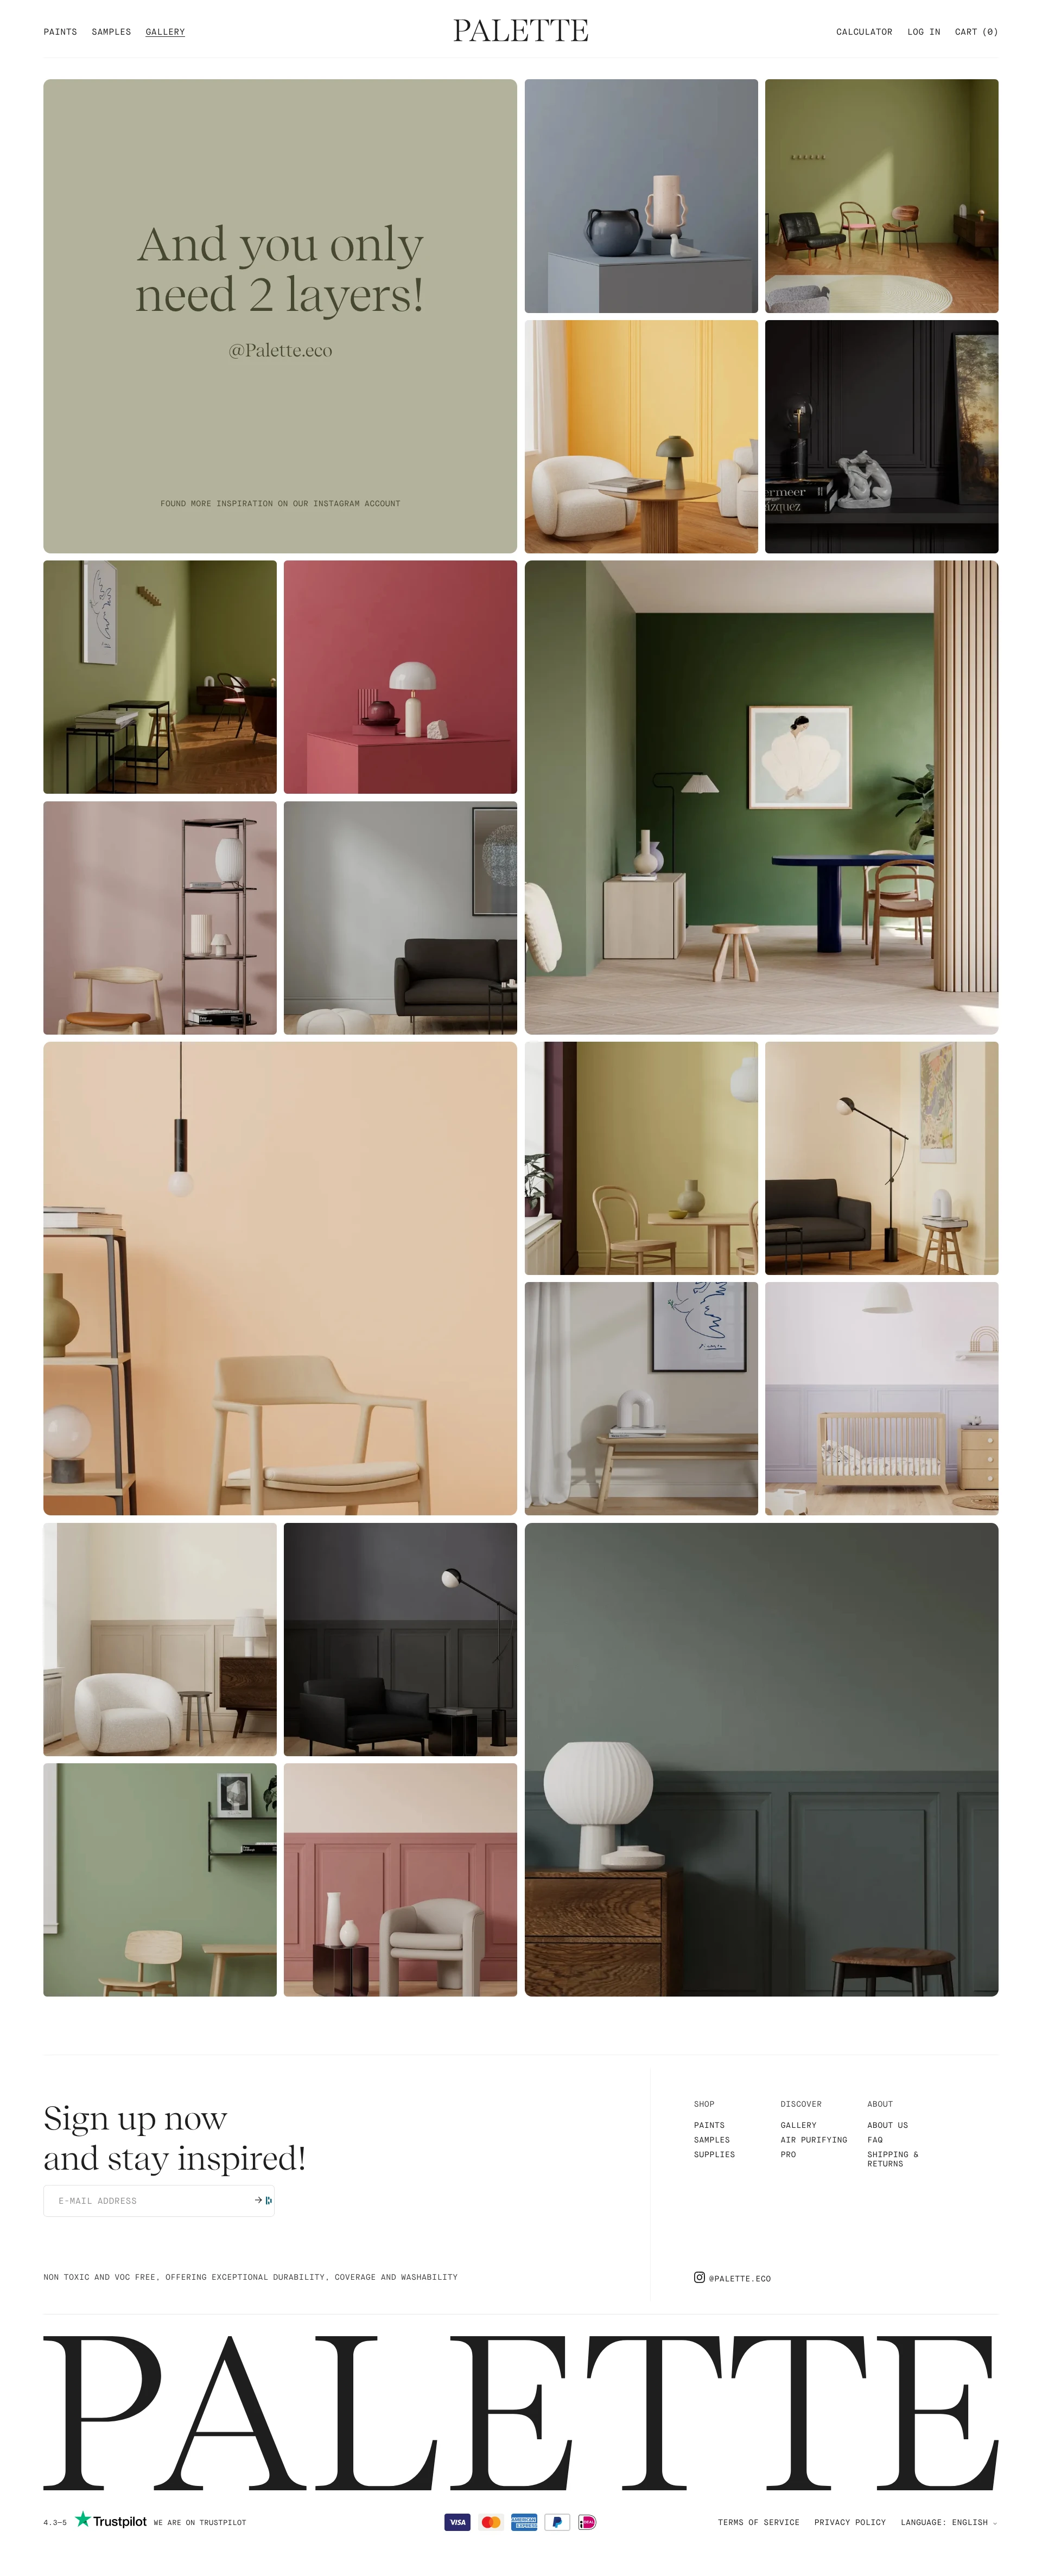 Palette Landing Page Example: Sustainable, collorfull and VOC free paints for a modern interior.